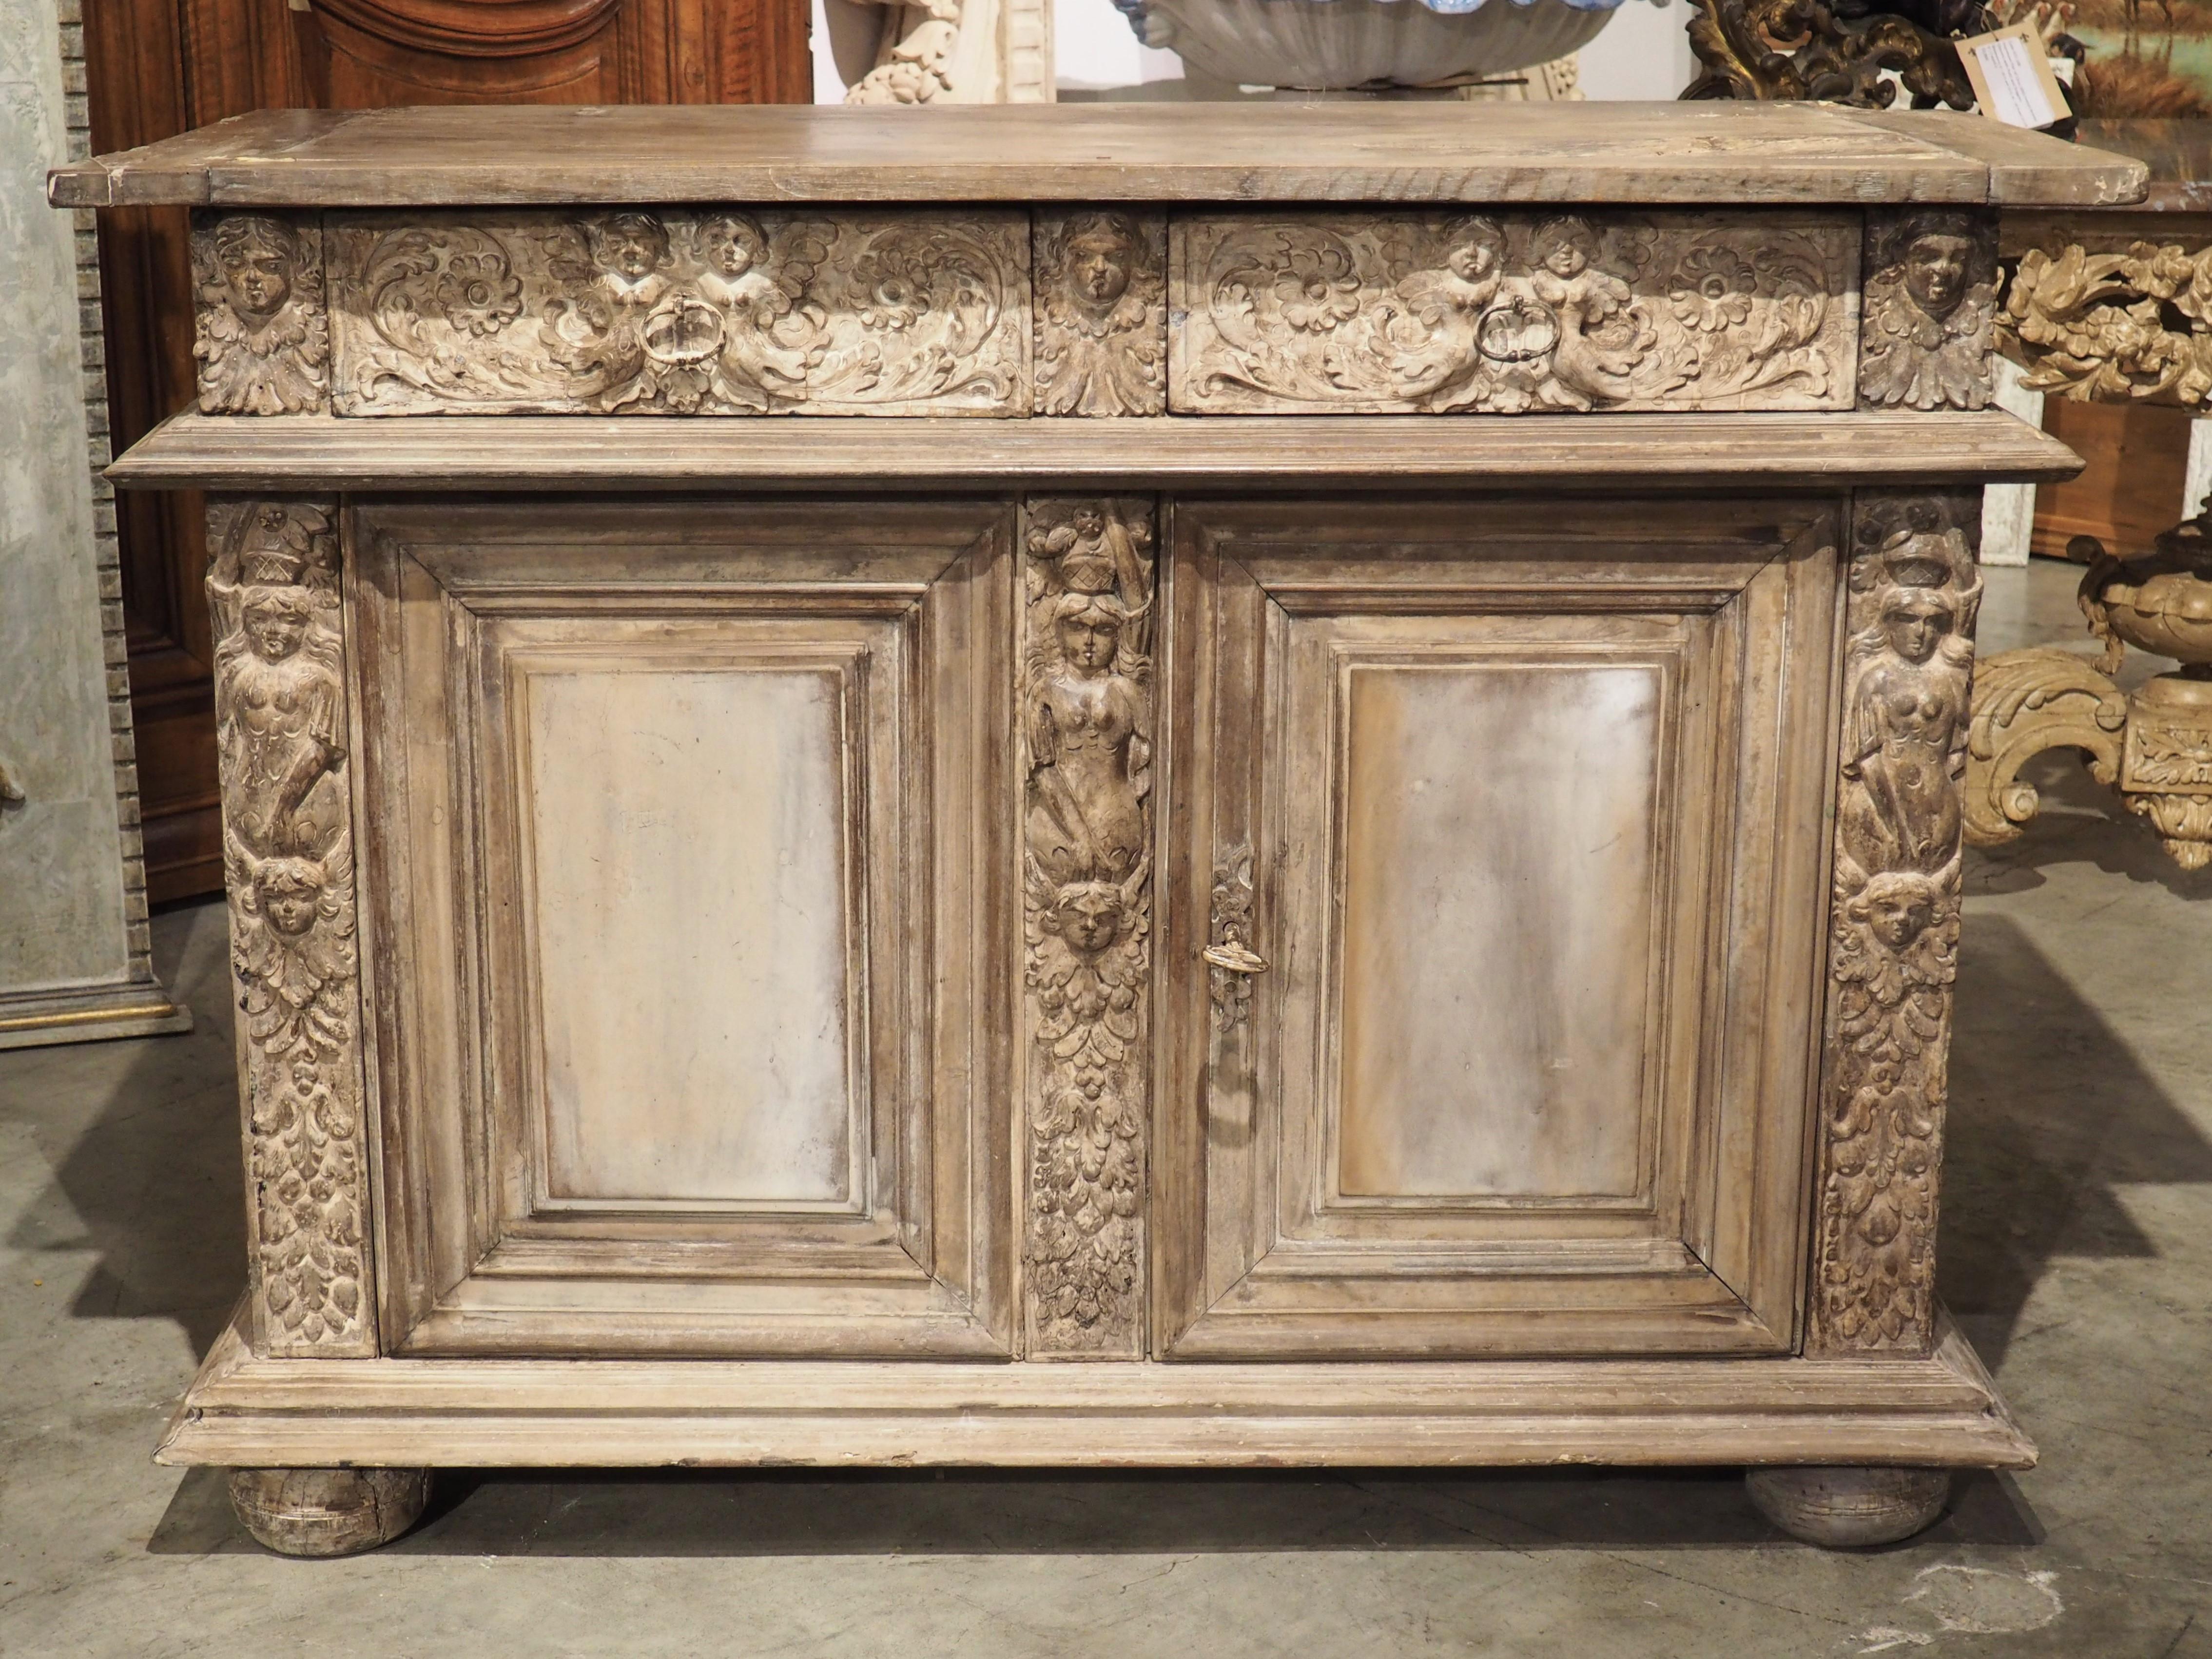 Unlike their Italian counterparts who favored painted and inlaid motifs, French ebenistes during the Renaissance utilized elaborate carvings to embellish their furniture. A fantastic example of the French method of period Renaissance (1600s)